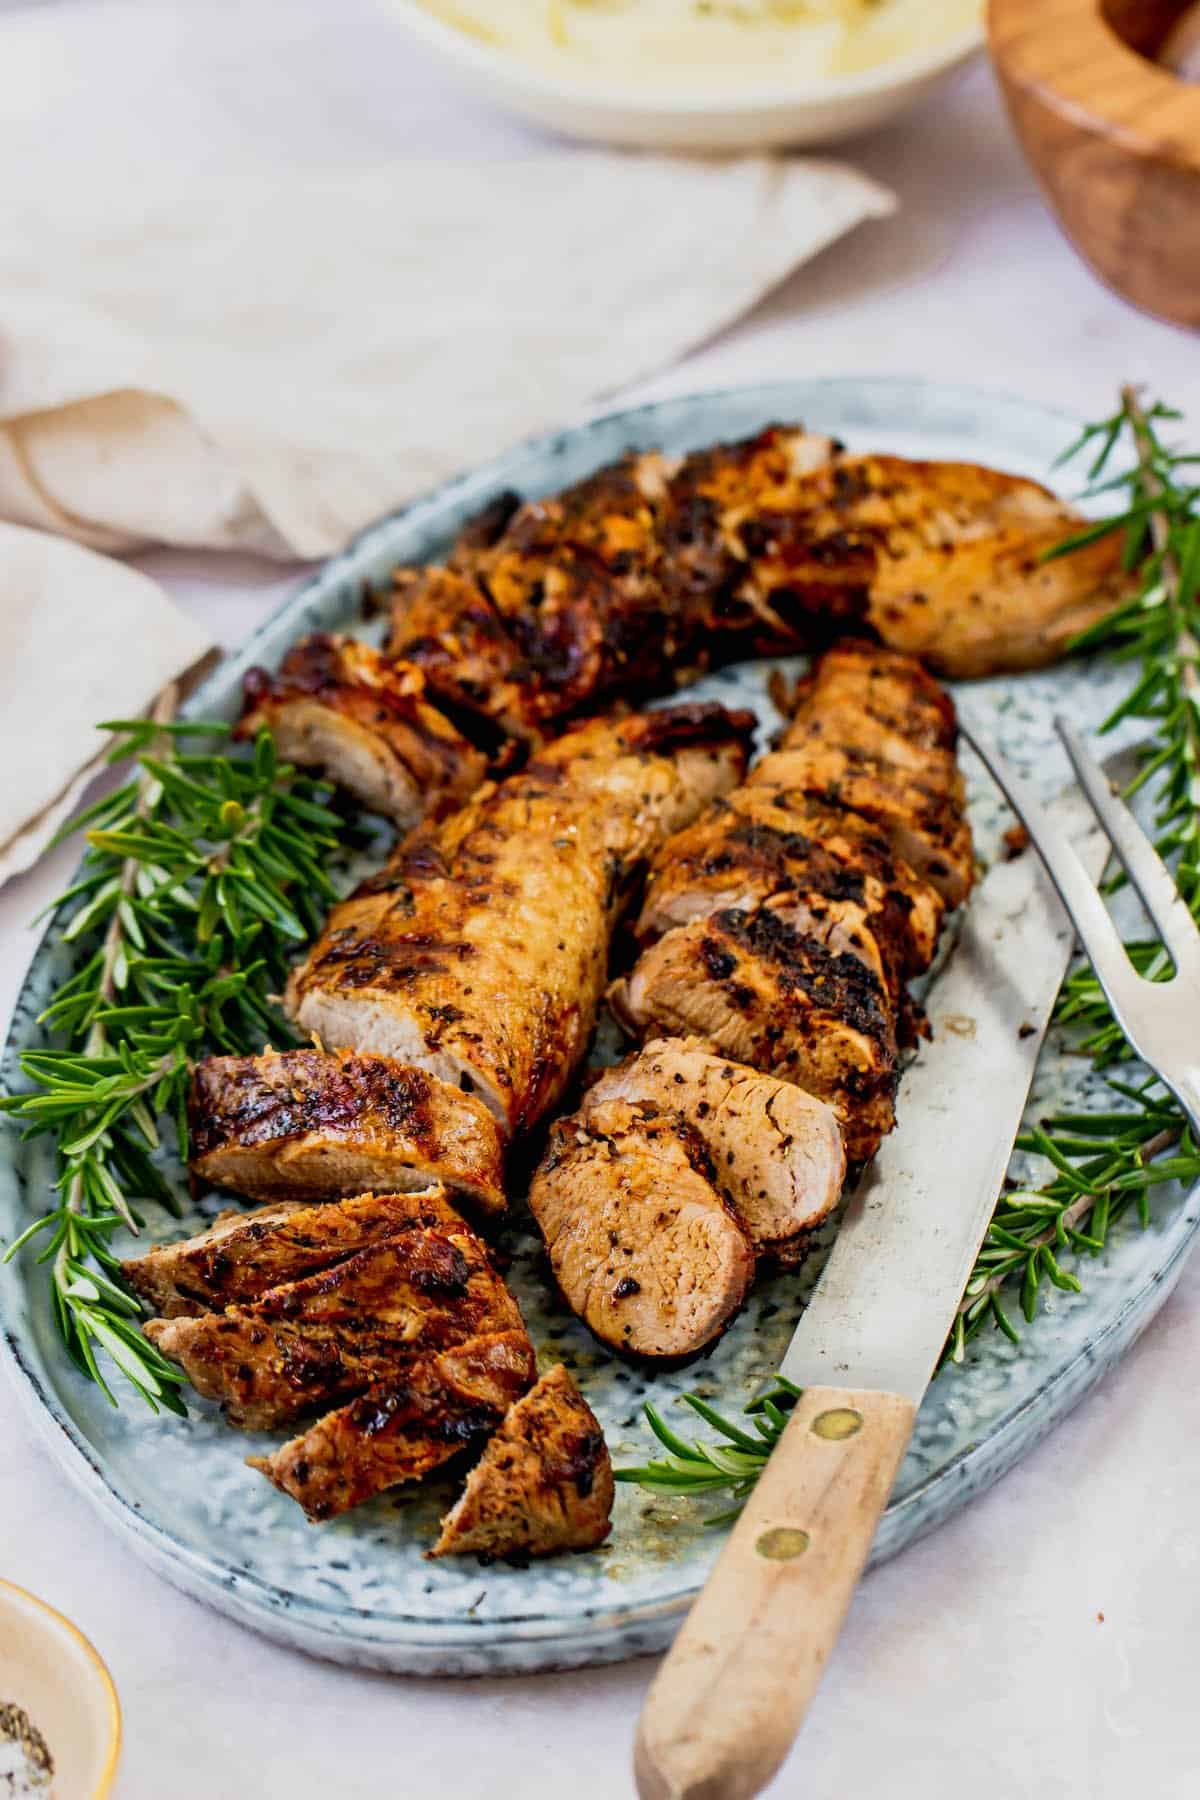 A platter with two grilled pork tenderloins, fresh rosemary, and serving utensils.